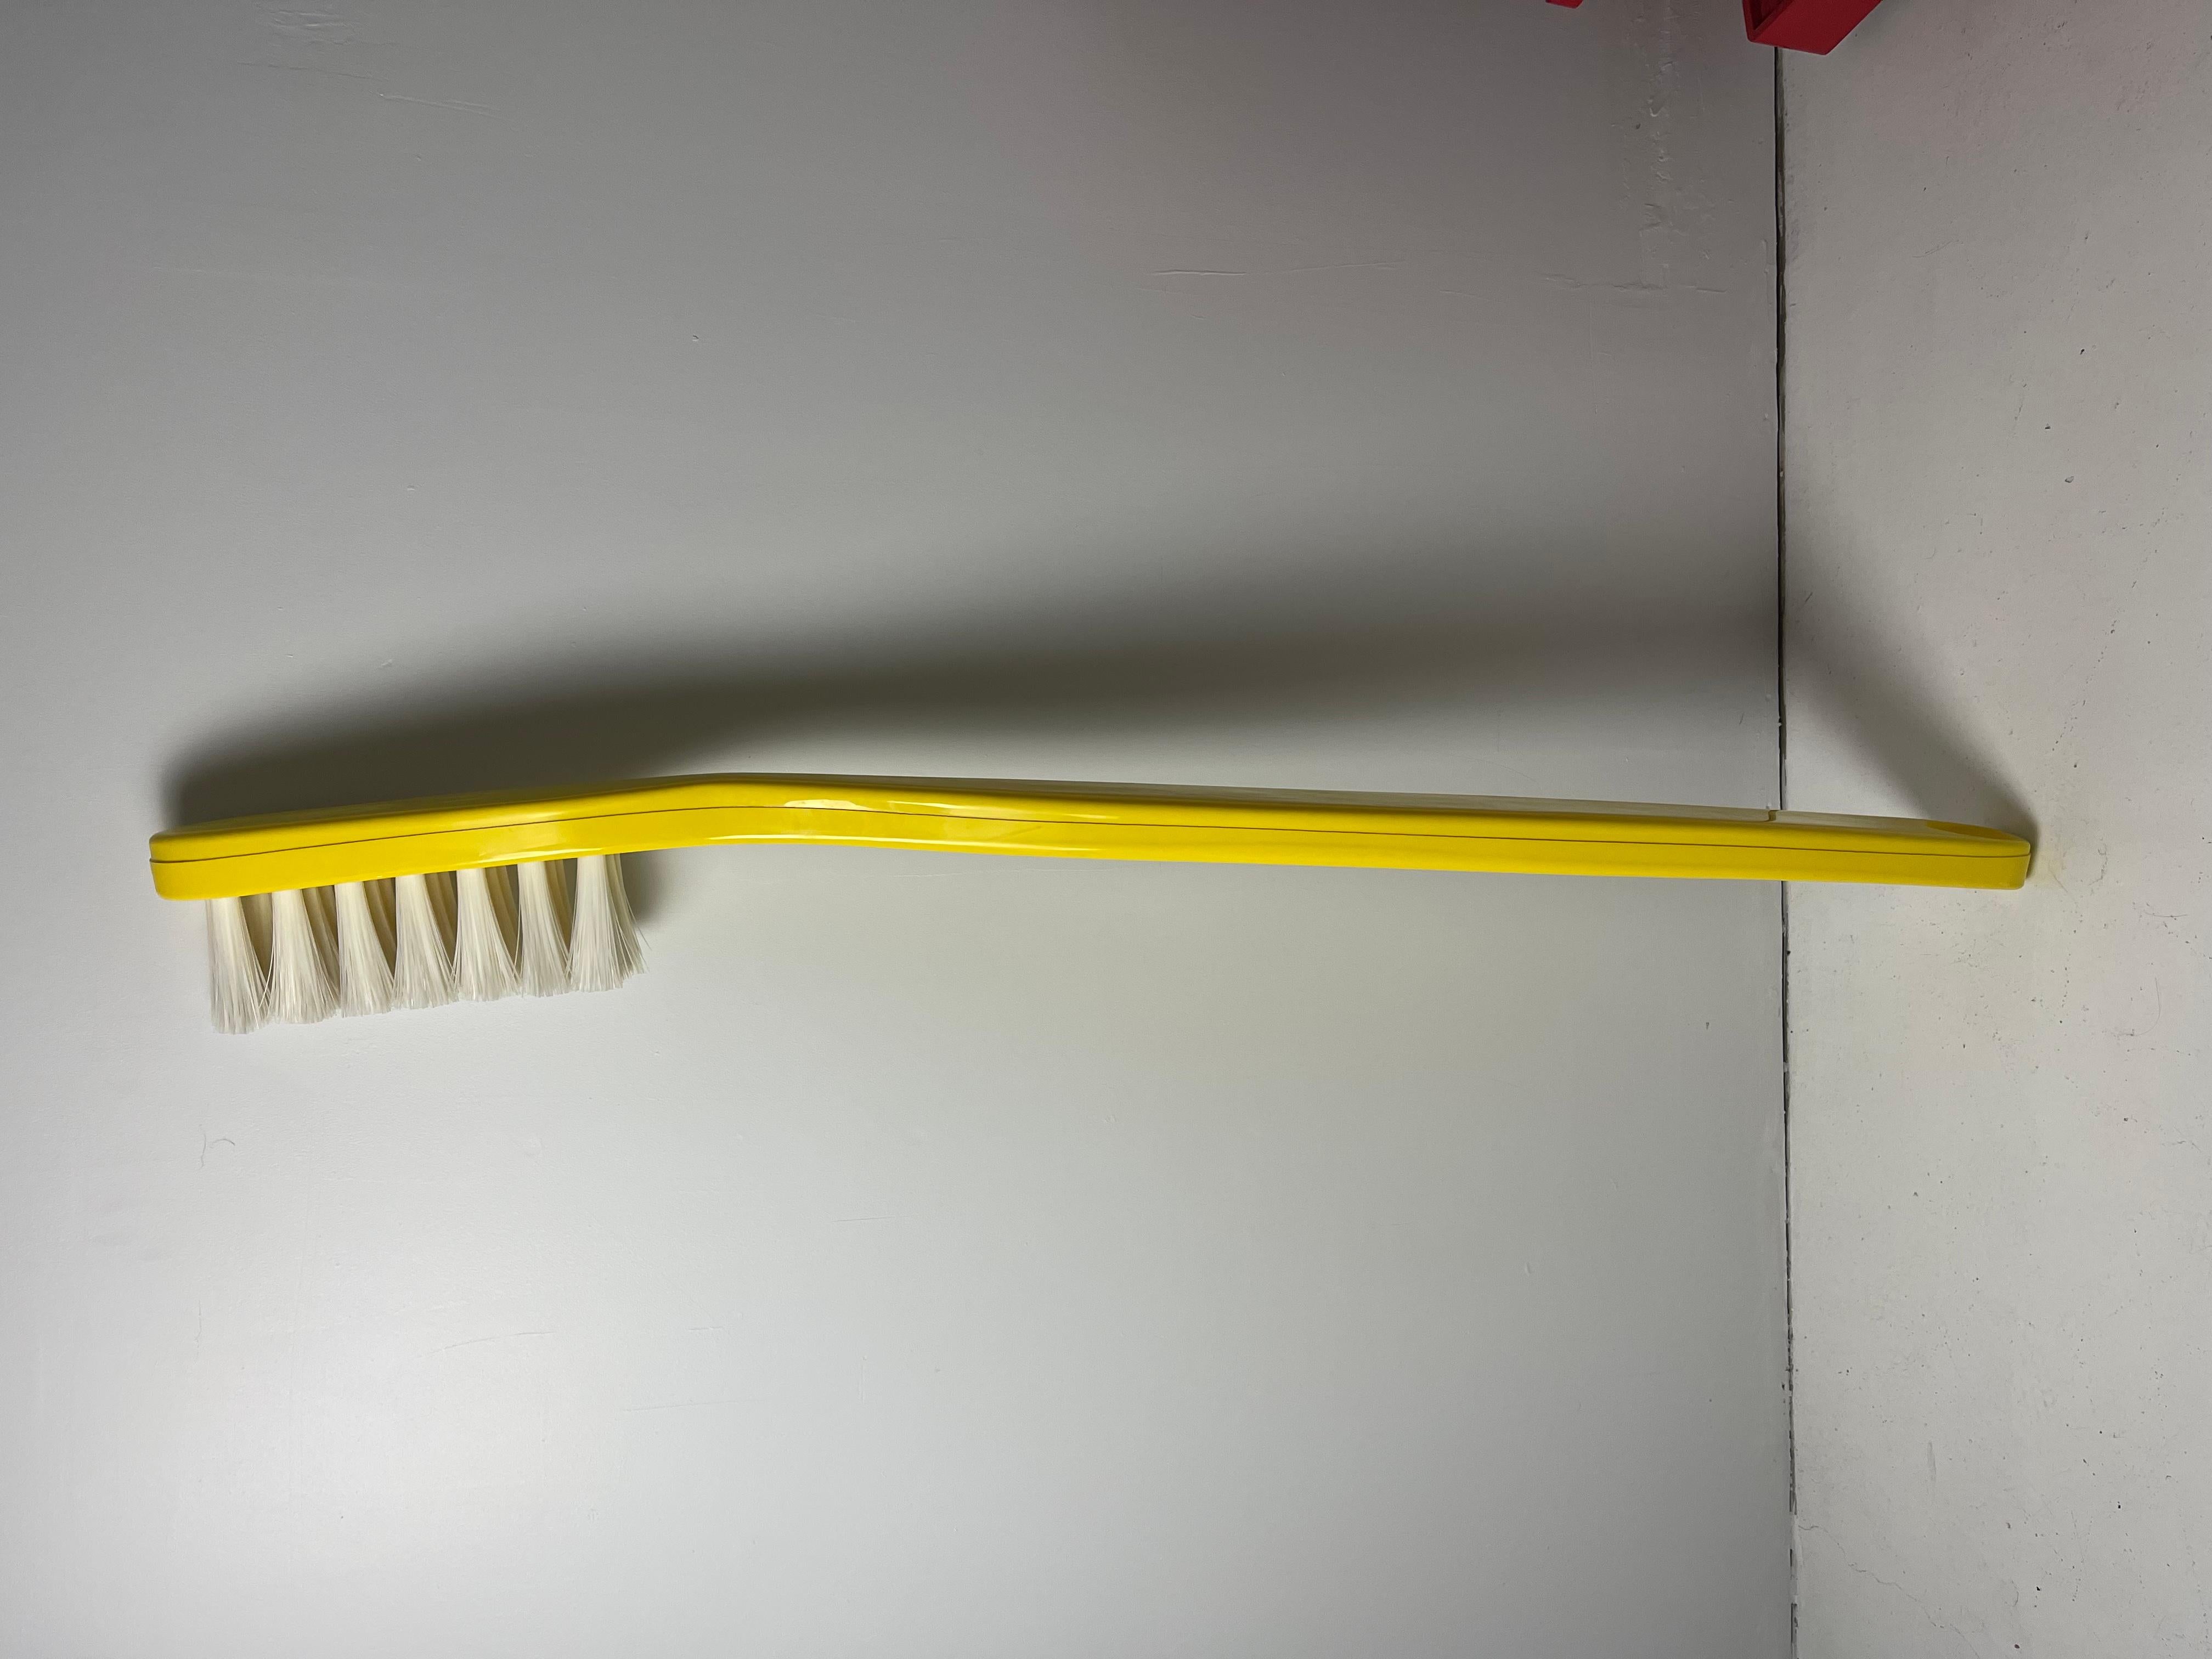 Giant Pop Art yellow tootbrush attributed to Think Big NYC, 1980s.